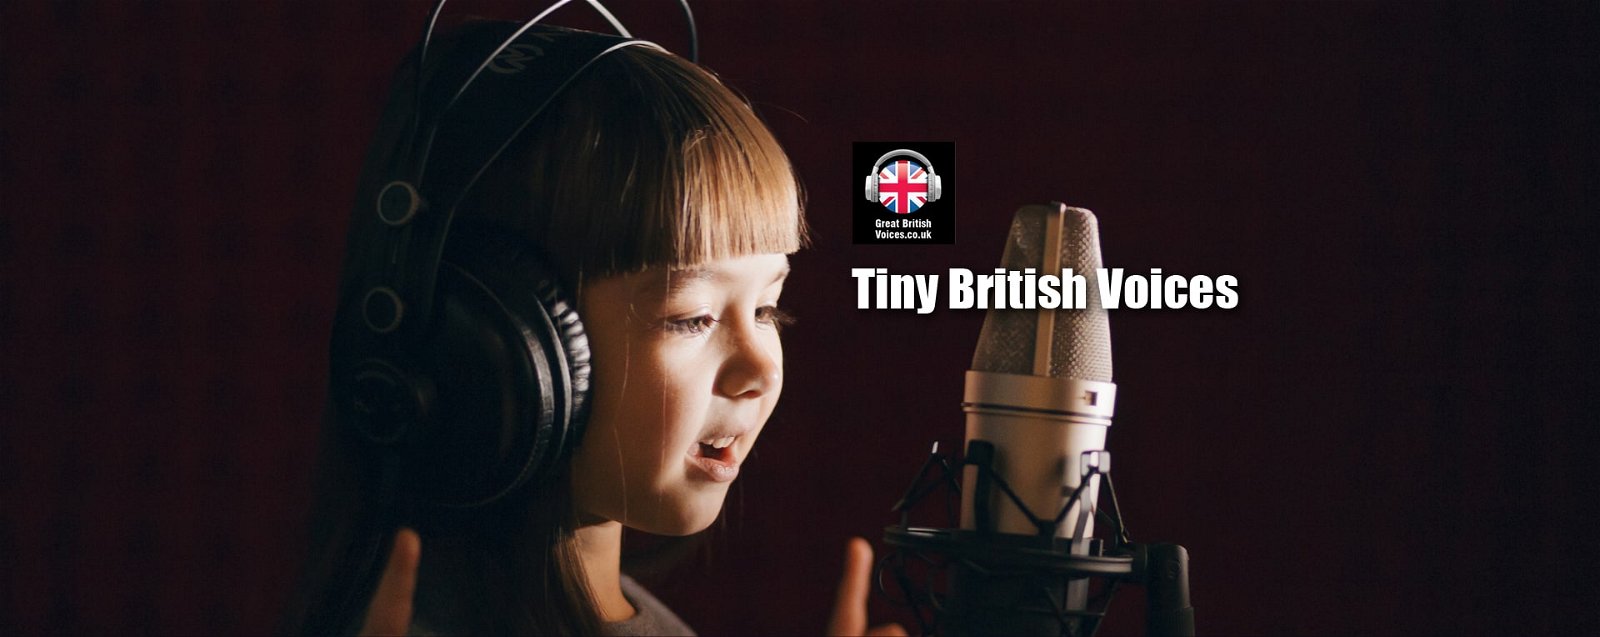 Tiny British Childrens Voices at Great British Voices-min